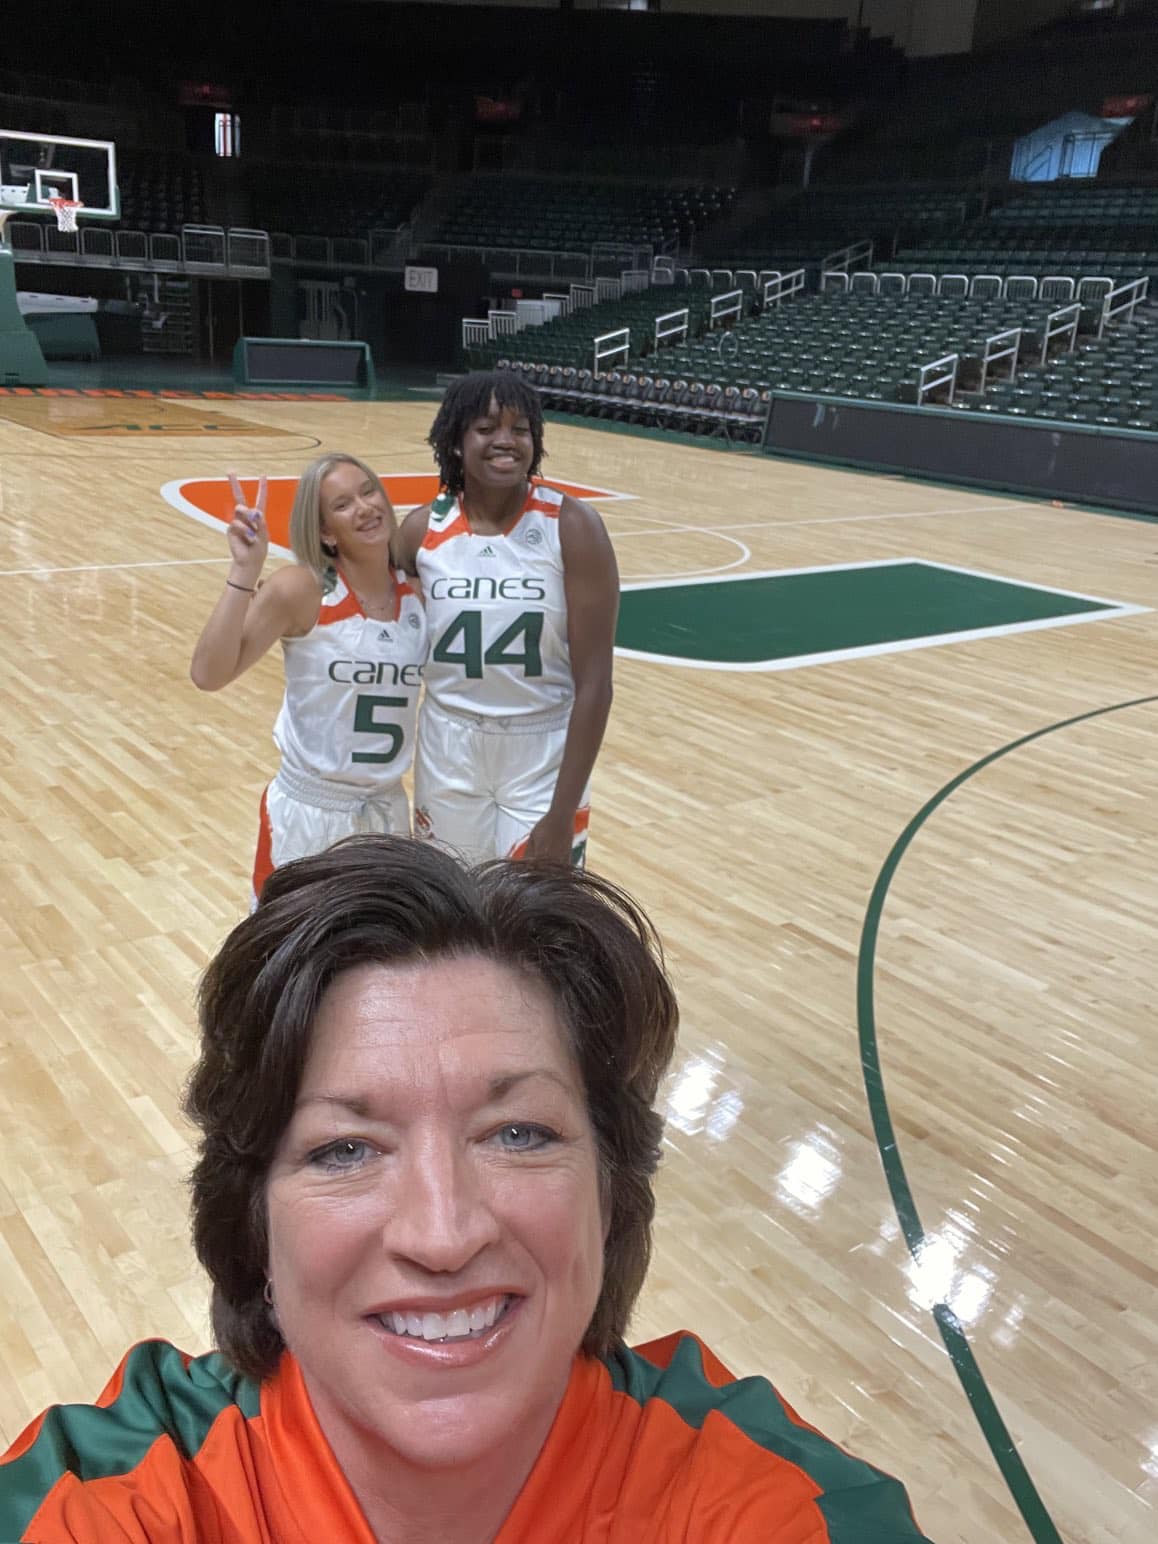 Katie Meier to step down as Head Women’s Basketball Coach at the University of Miami